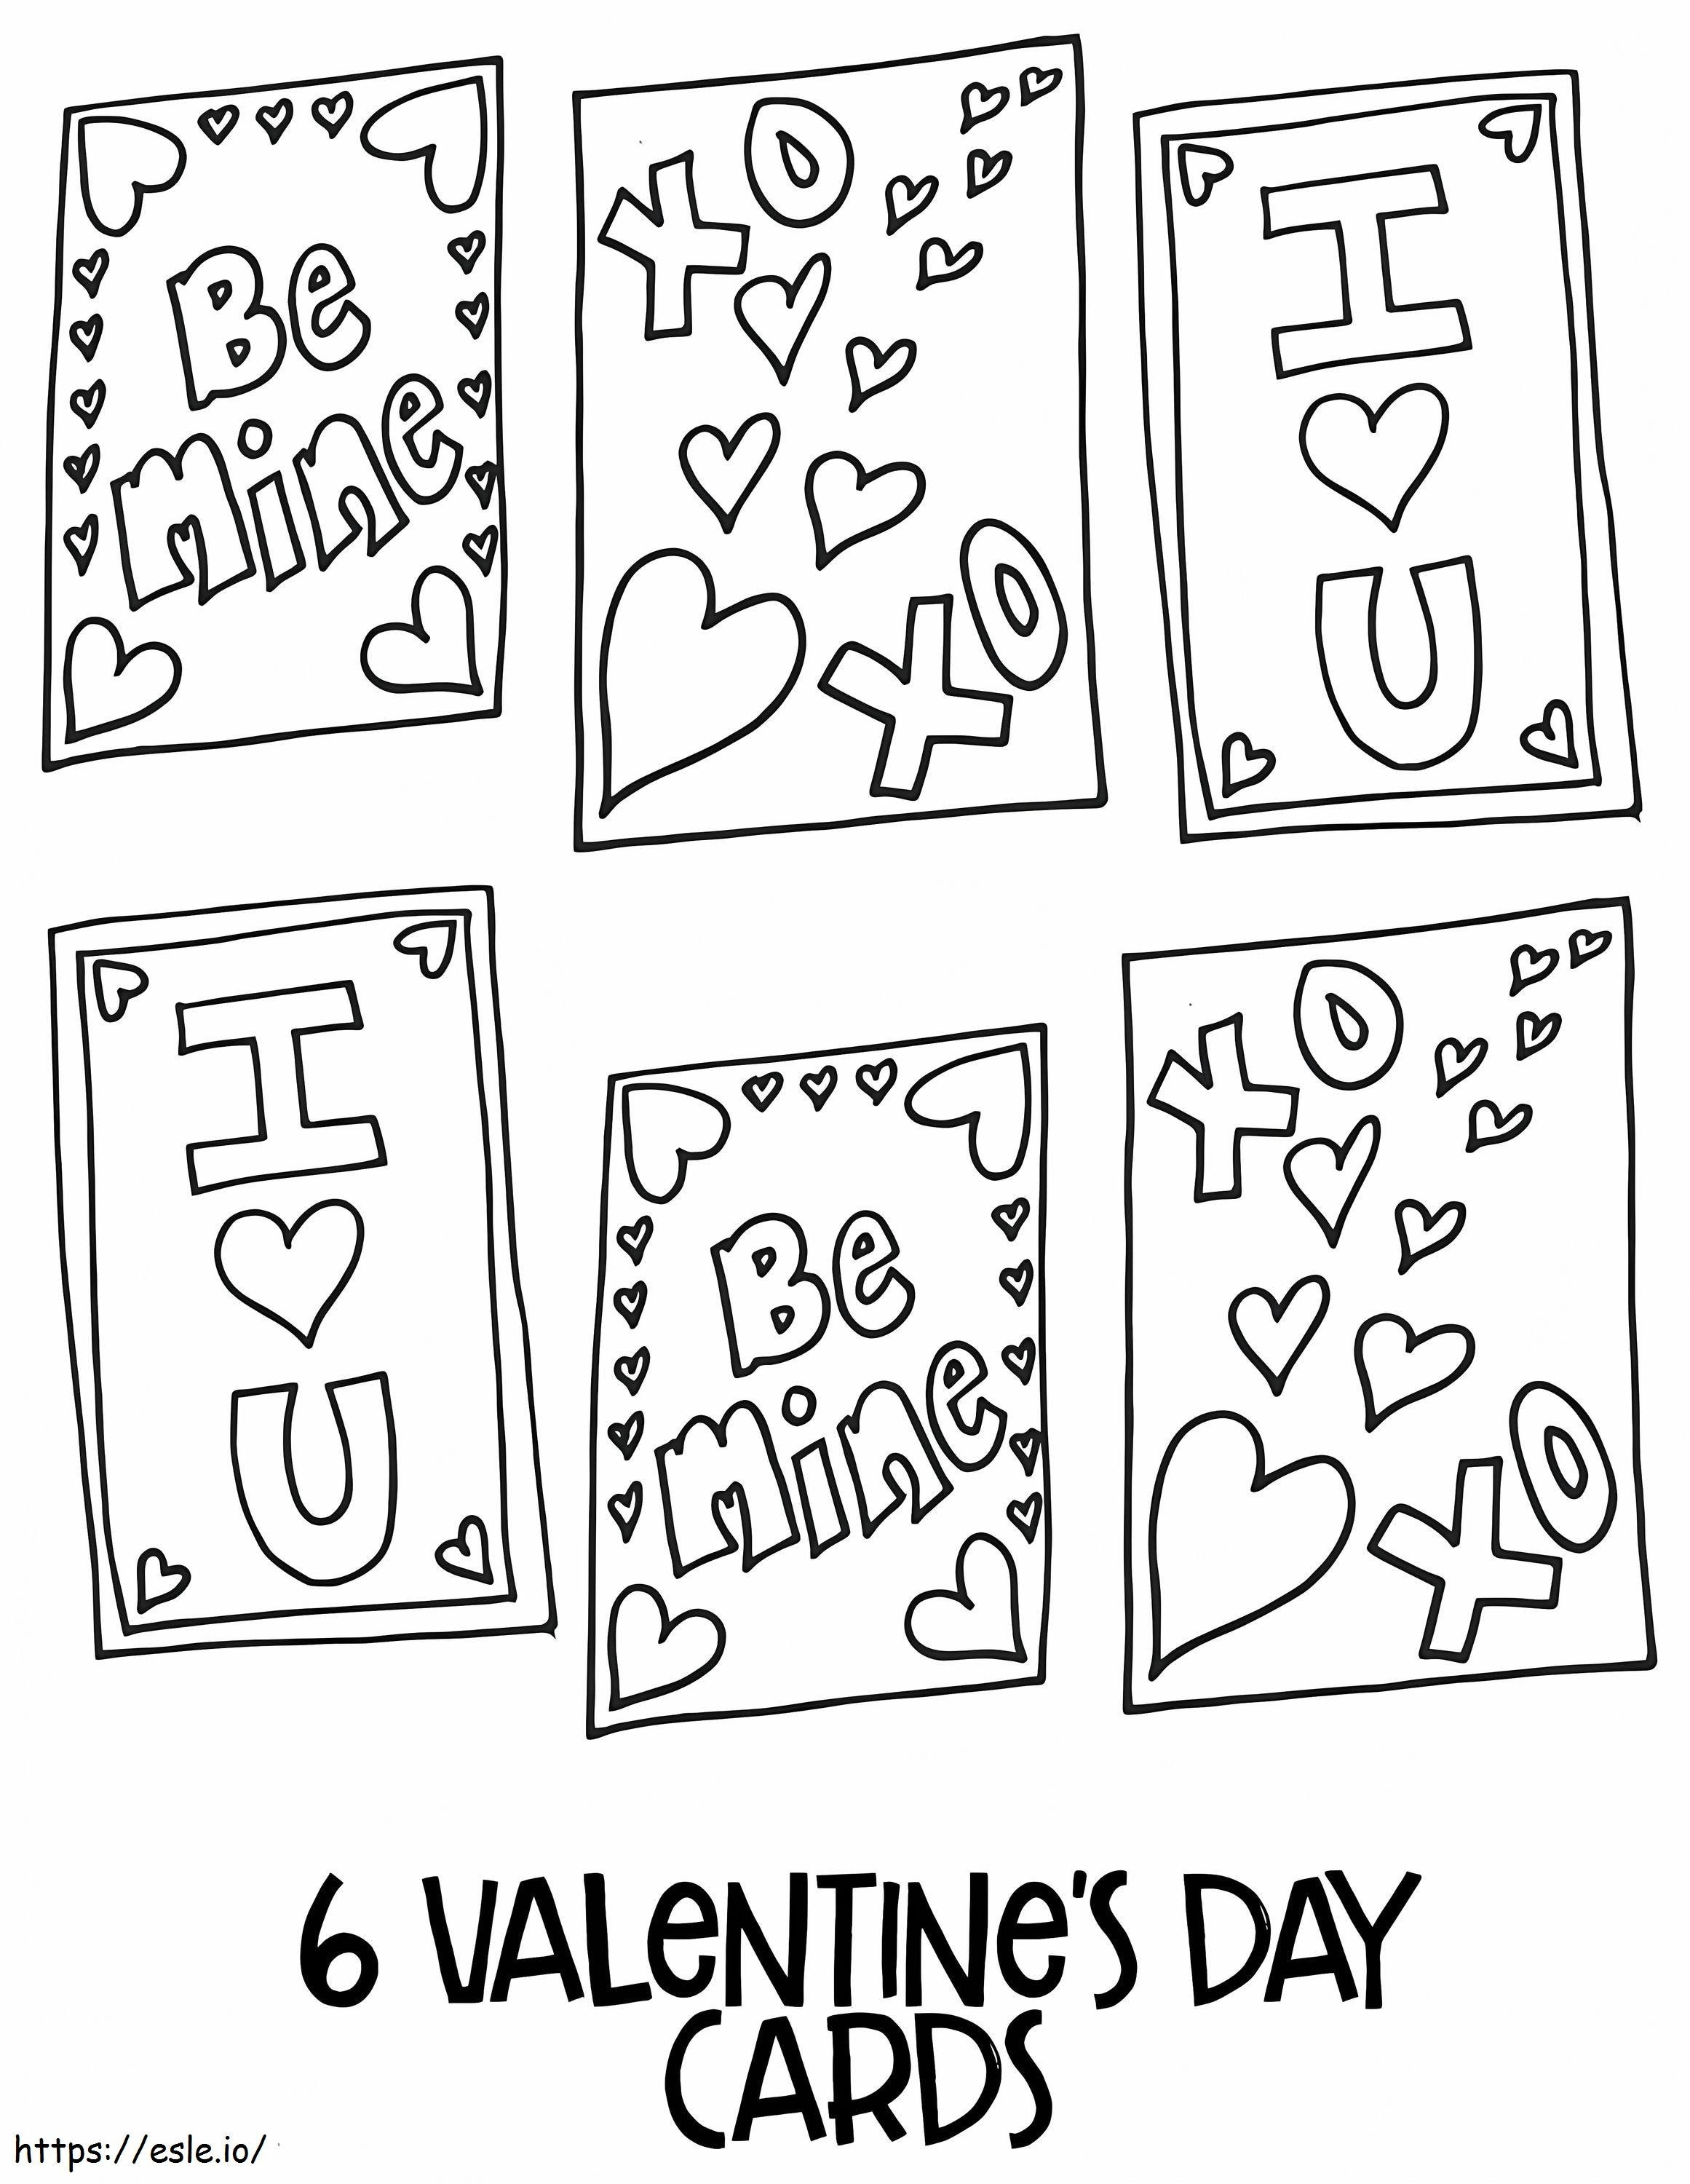 Valentines Day Cards coloring page